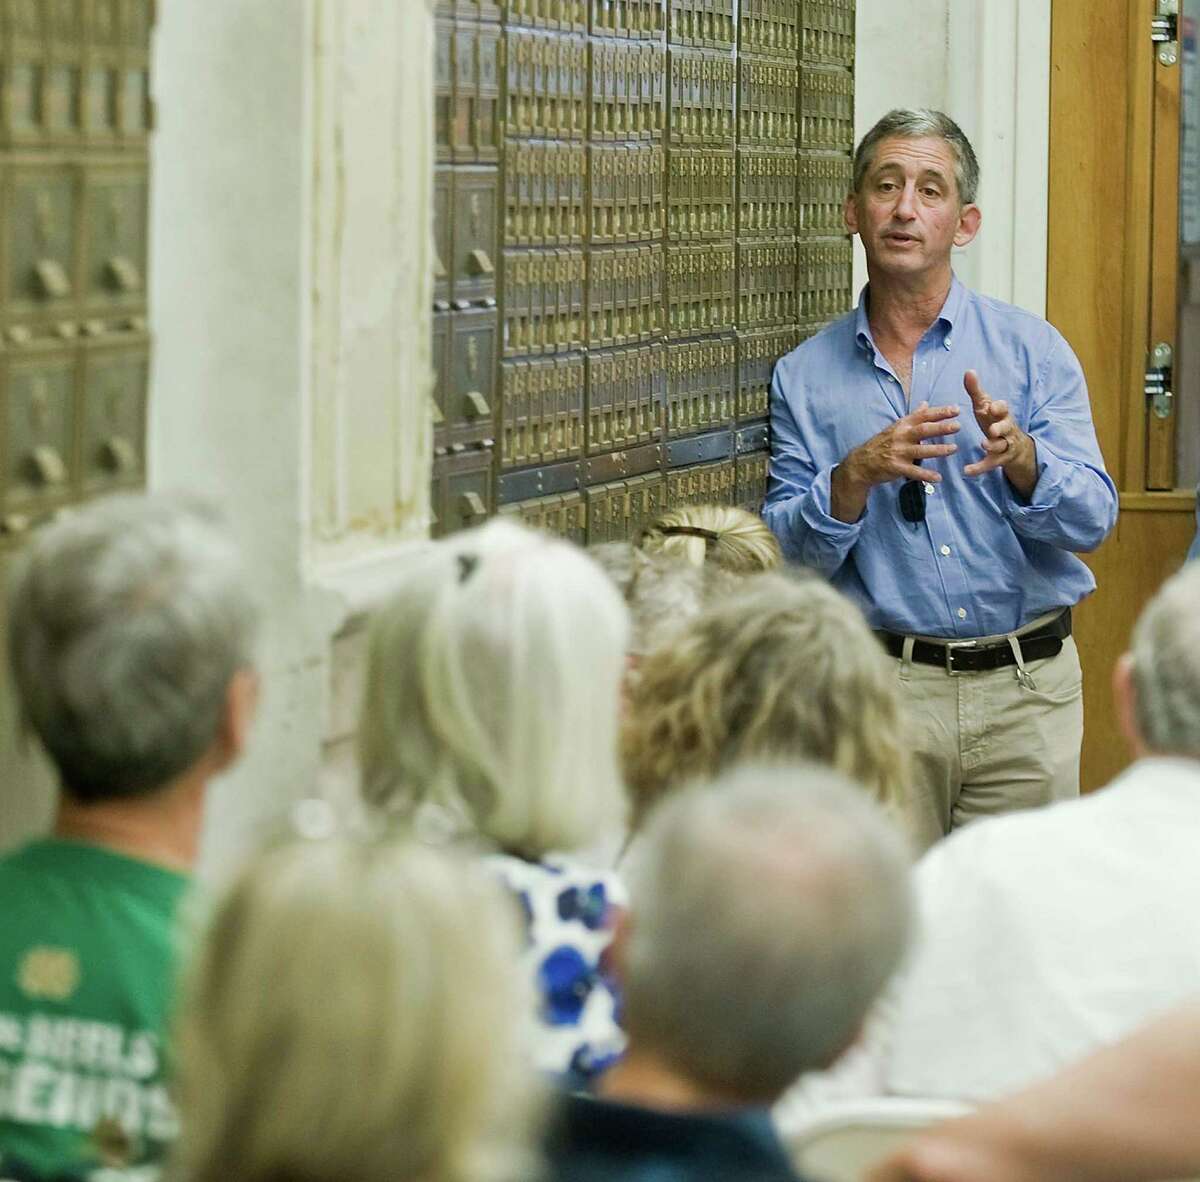 Bruce Berg, Chief Executive Officer, Cappelli Organization, answers questions by visitors about the Post office. The city of Stamford's historic preservation advisory commission hosts a 375th anniversary celebration centered around the plans to retain and restore the historic Atlantic Street Post Office. Saturday, Sept. 17, 2016